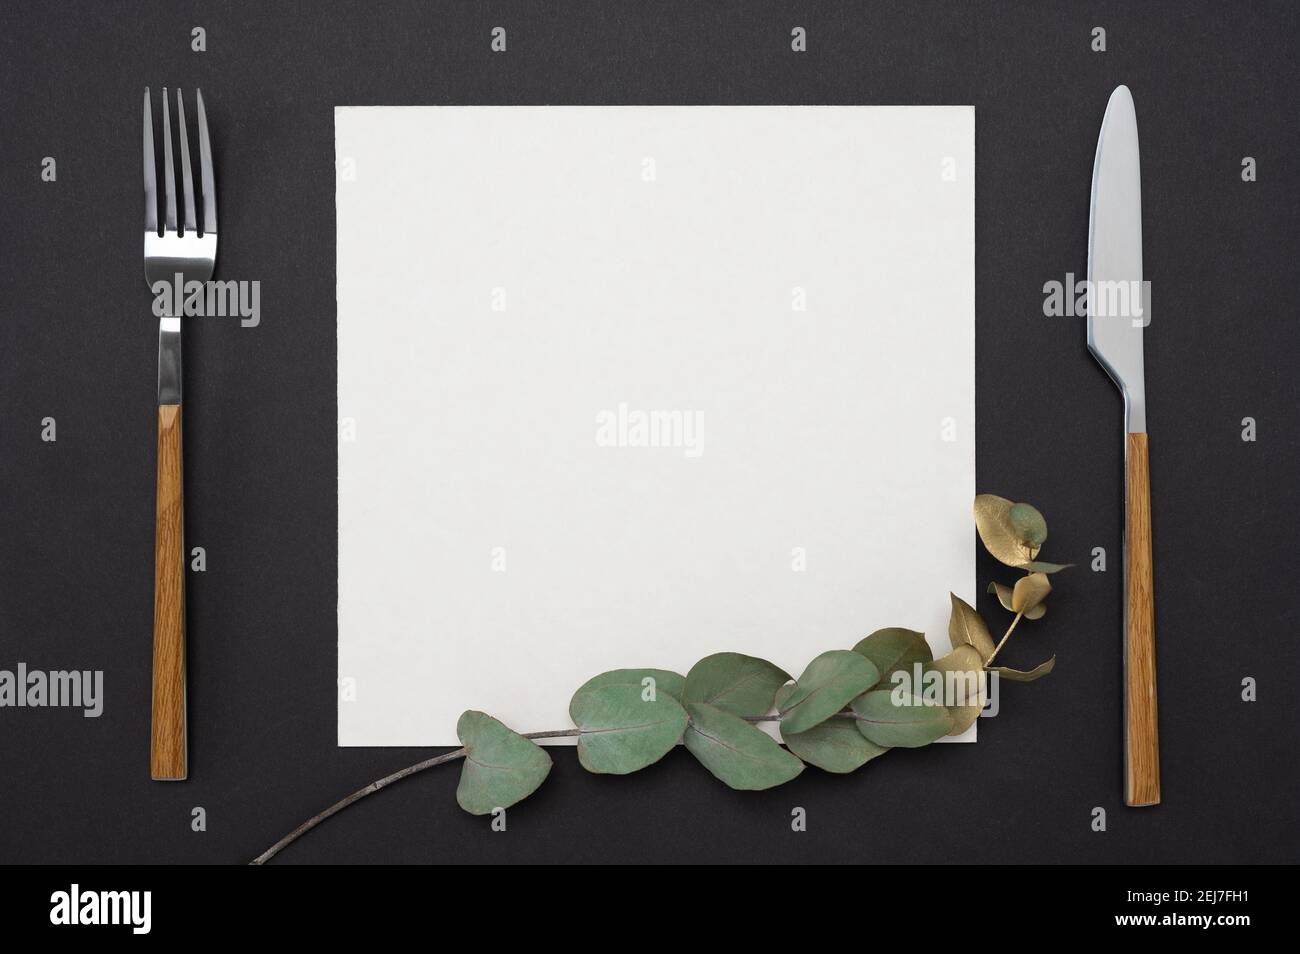 Mockup menu, recipe or cookbook. knife, fork, square paper mockup decorated with gold eucalyptus branch on a black table. Stock Photo